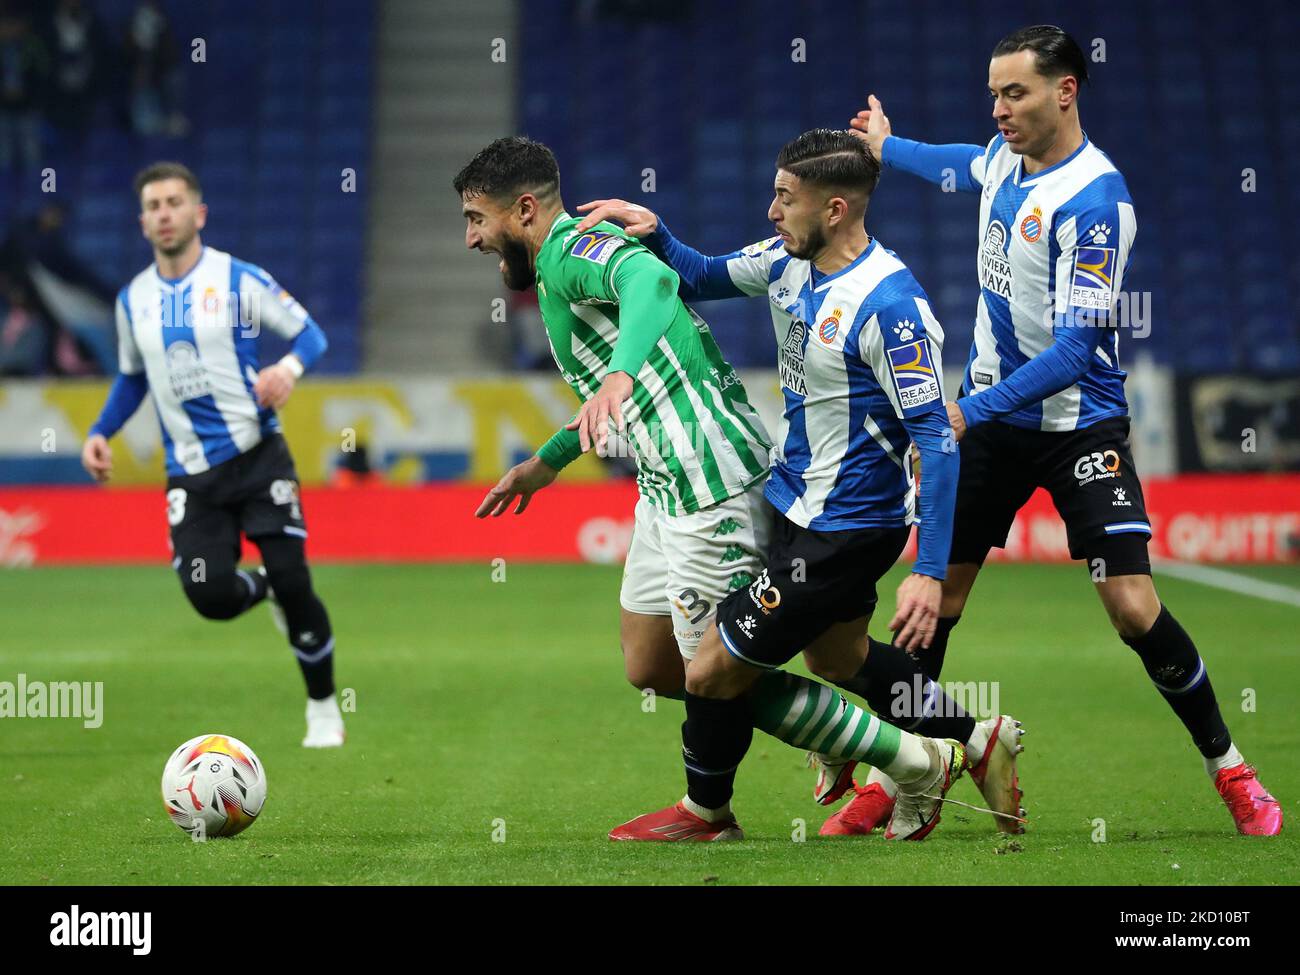 Oscar Gil, Raul de Tomas and Nabil Fekir during the match between RCD Espanyol and Real Betis Balompie, corresponding to the week 22 of the Liga Santander, played at the RCDE Stadium, in Barcelona, on 21th January 2022. -- (Photo by Urbanandsport/NurPhoto) Stock Photo